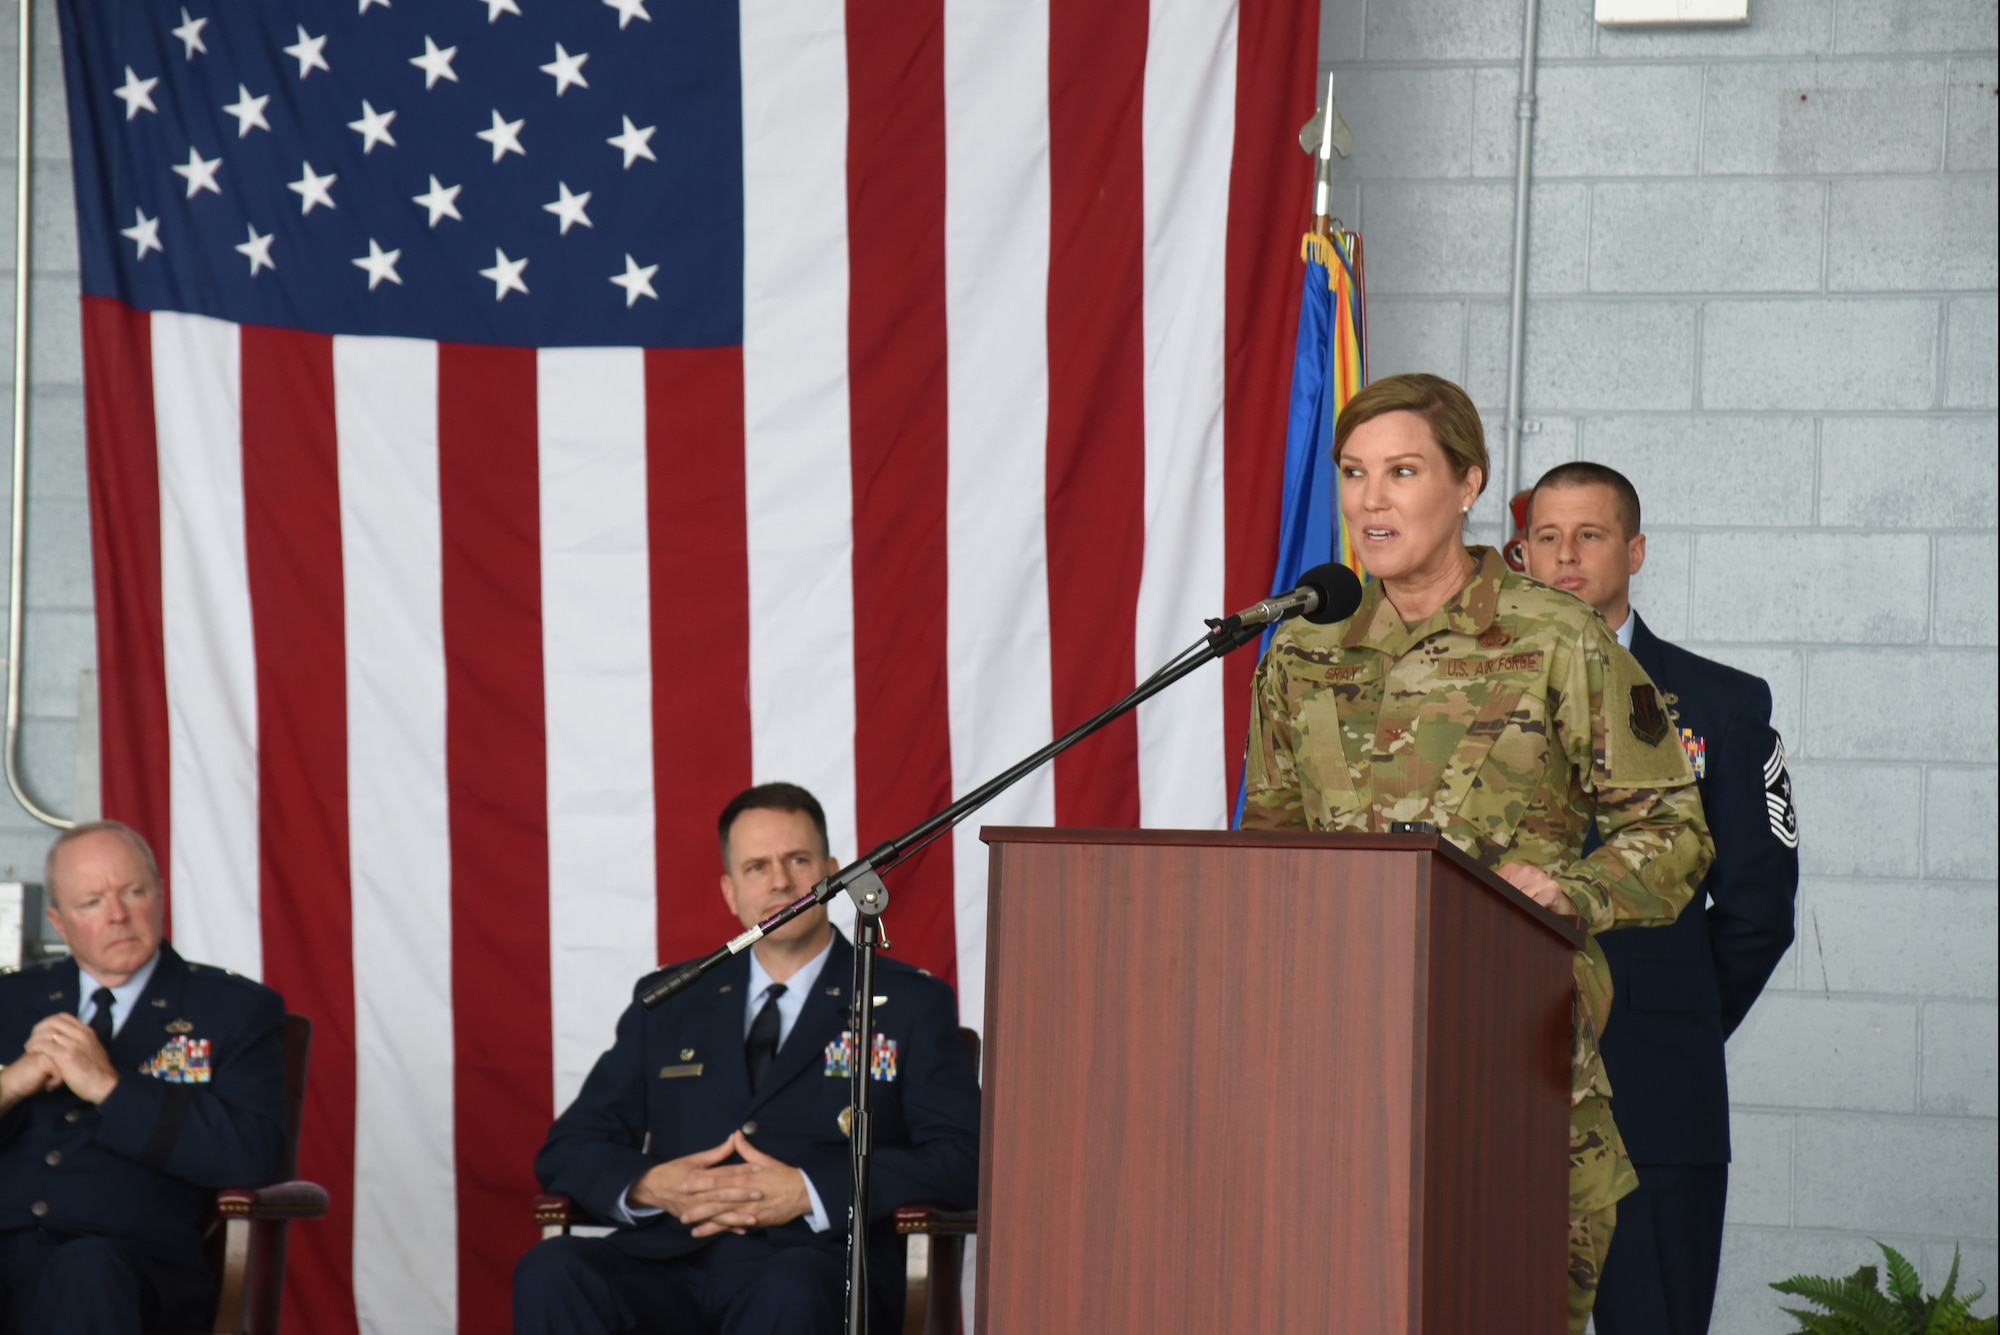 A woman in an air force uniform speaks at a podium.